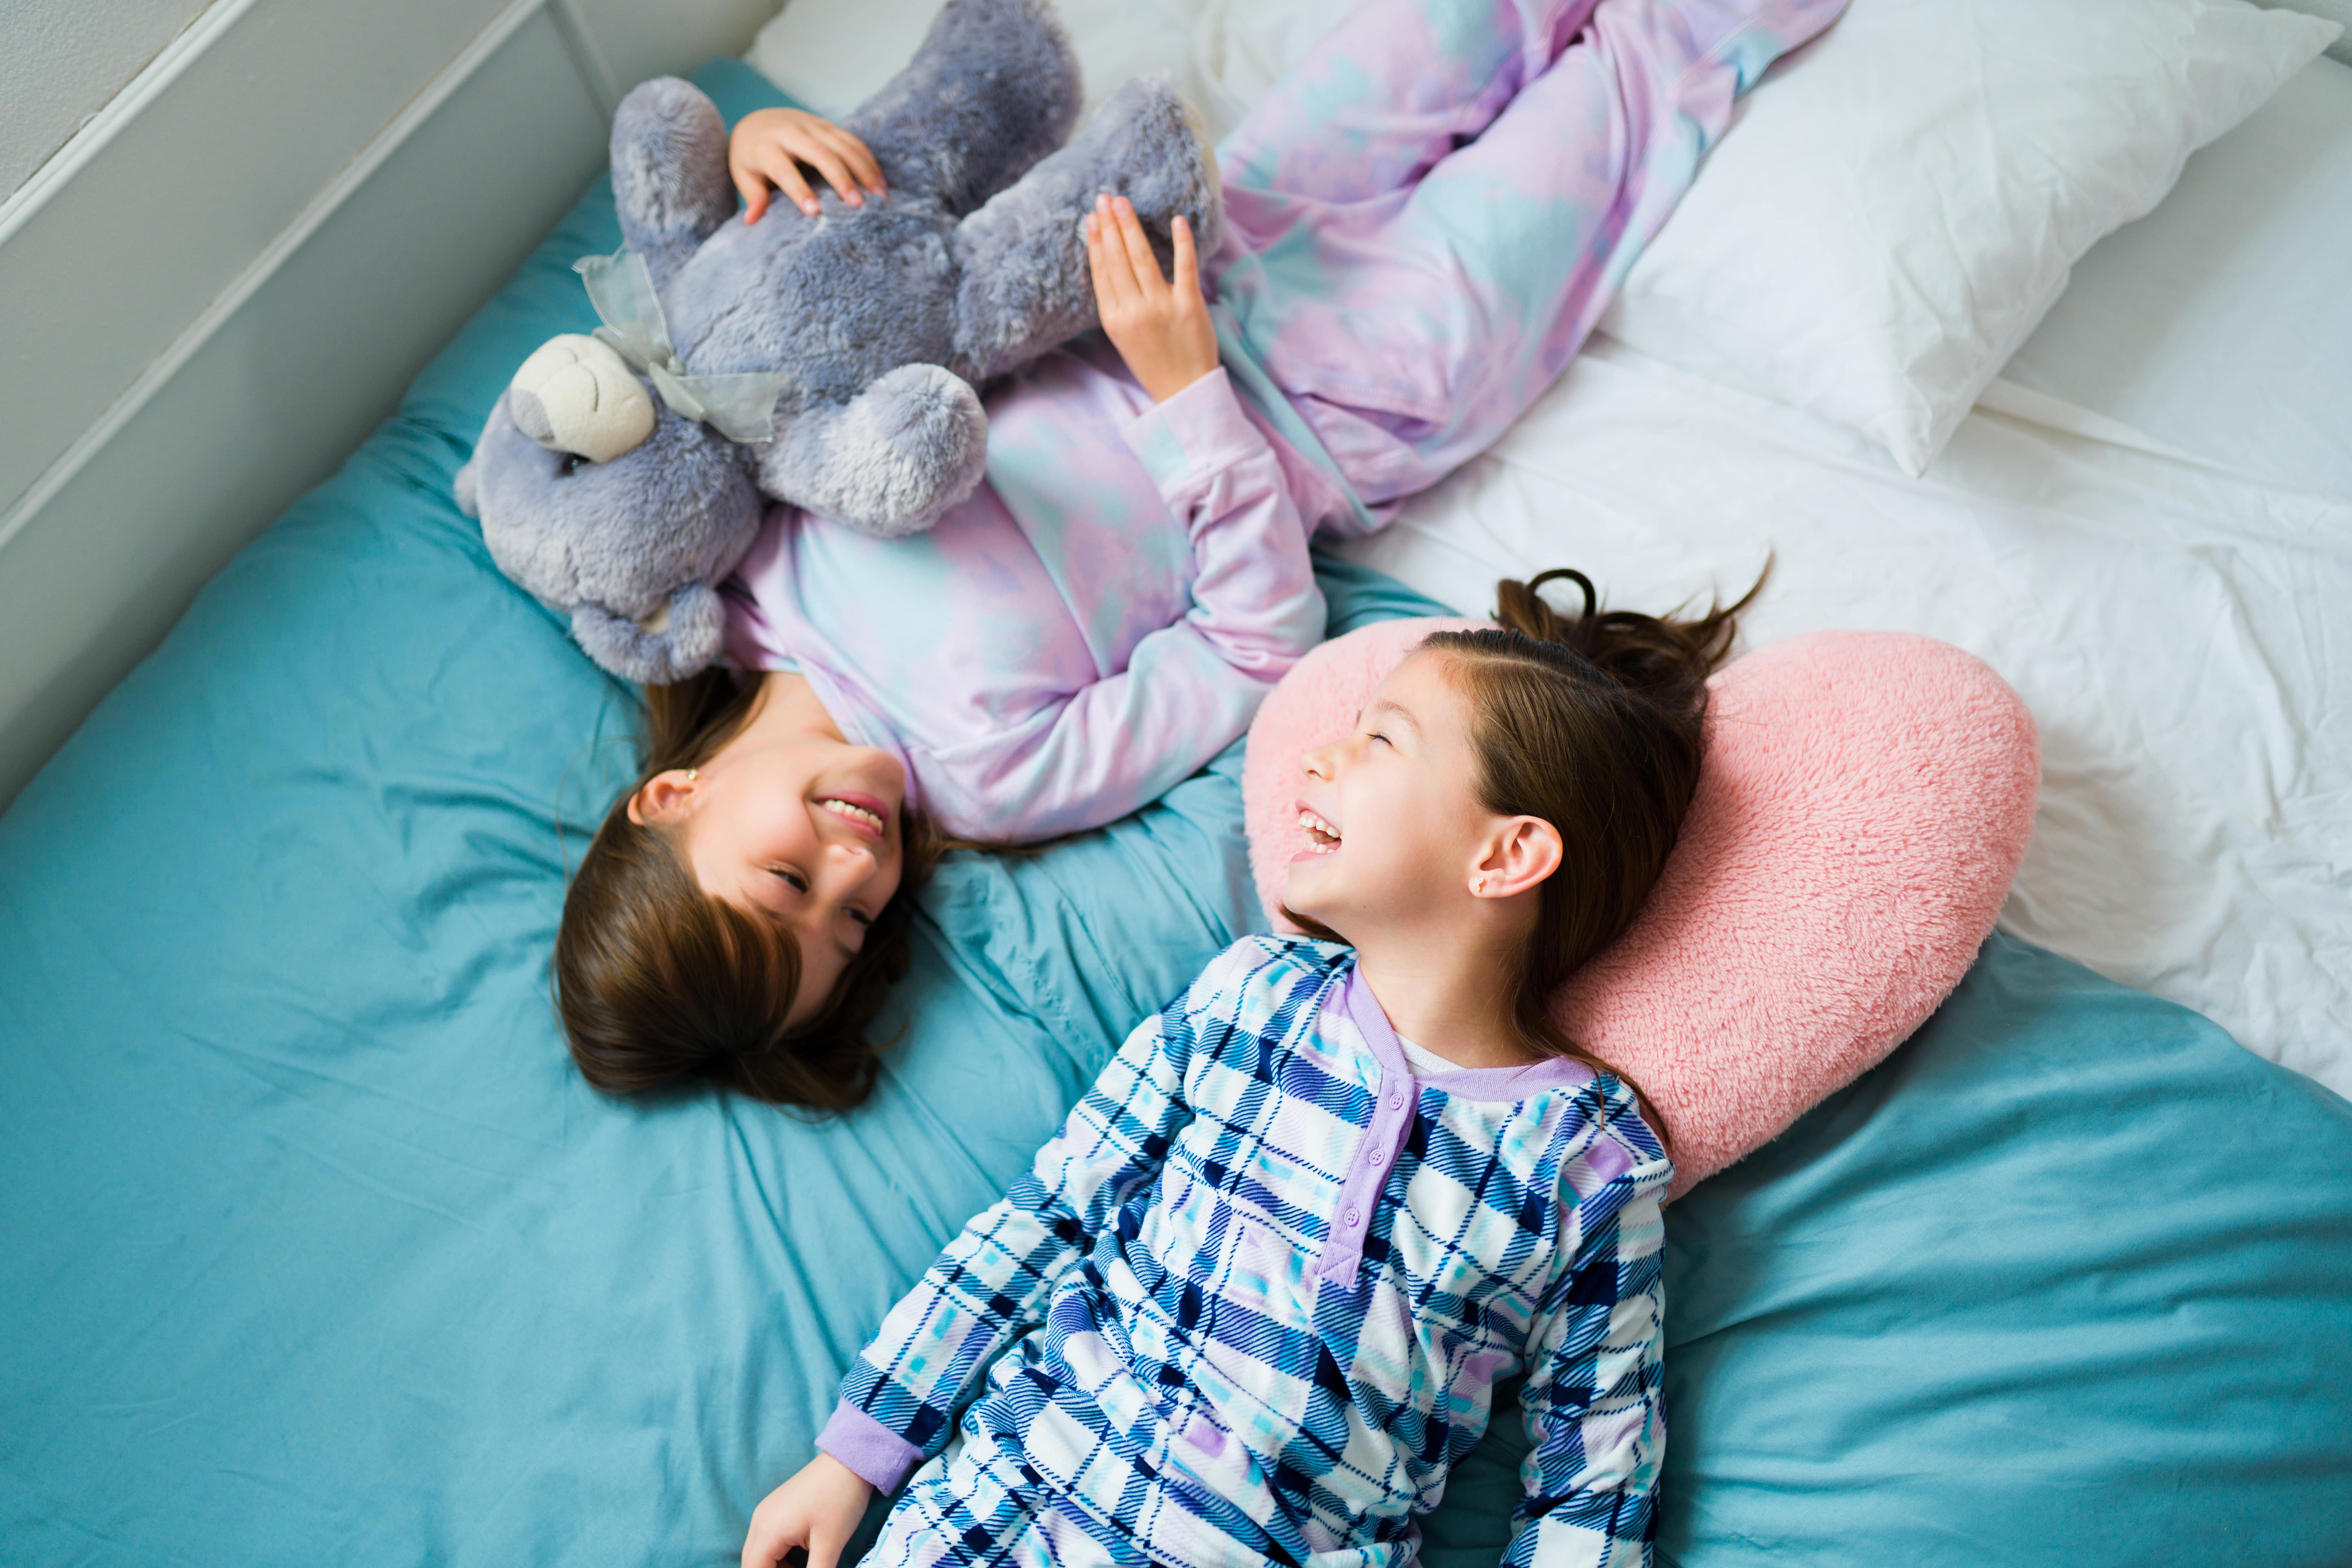 Two friends smiling in their PJs as they lie on a teal duvet. One is holding a fluffy purple teddy, the other is resting their head on a fluffy pink heart shaped pillow.